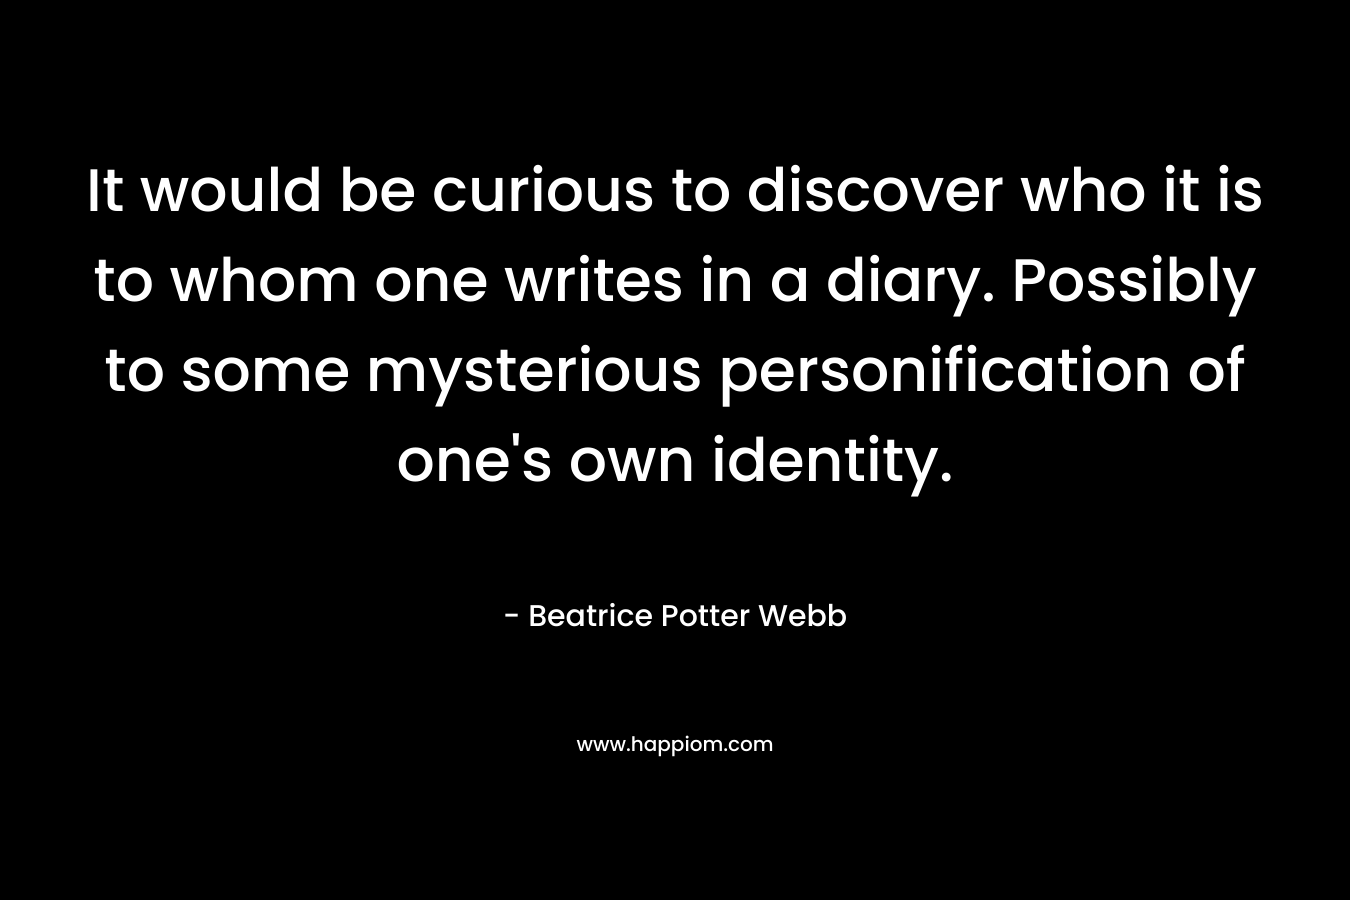 It would be curious to discover who it is to whom one writes in a diary. Possibly to some mysterious personification of one's own identity.